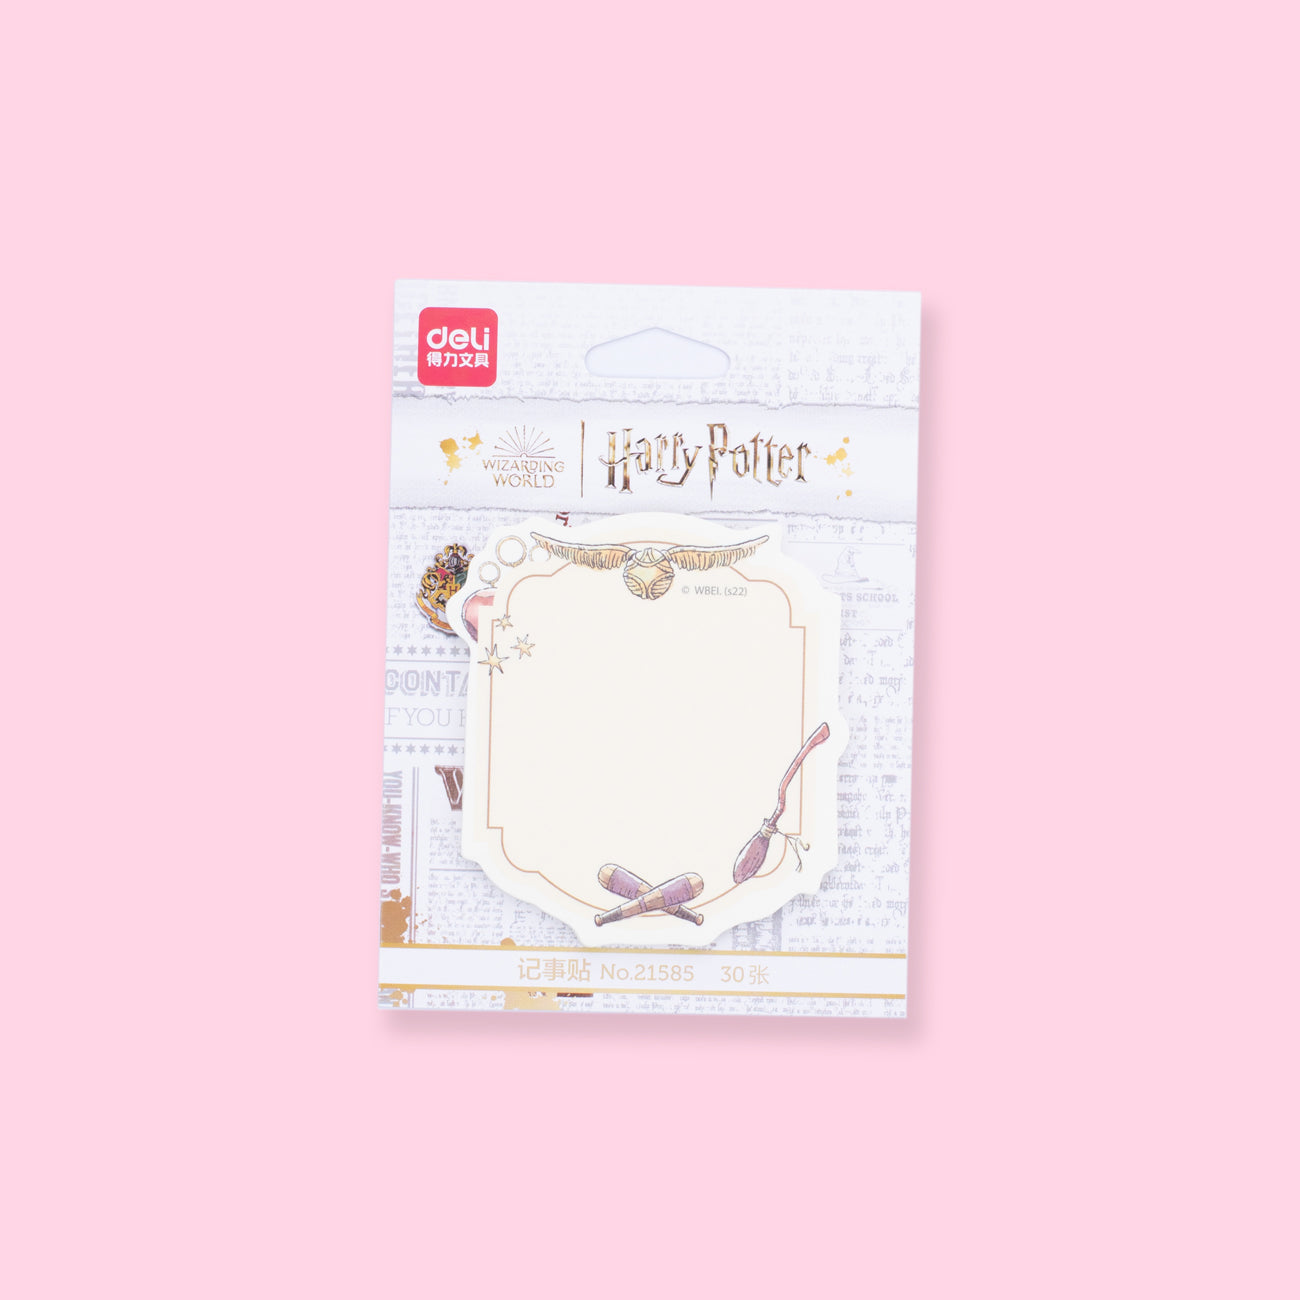 Harry Potter Limited Edition Sticky Notes - Wand